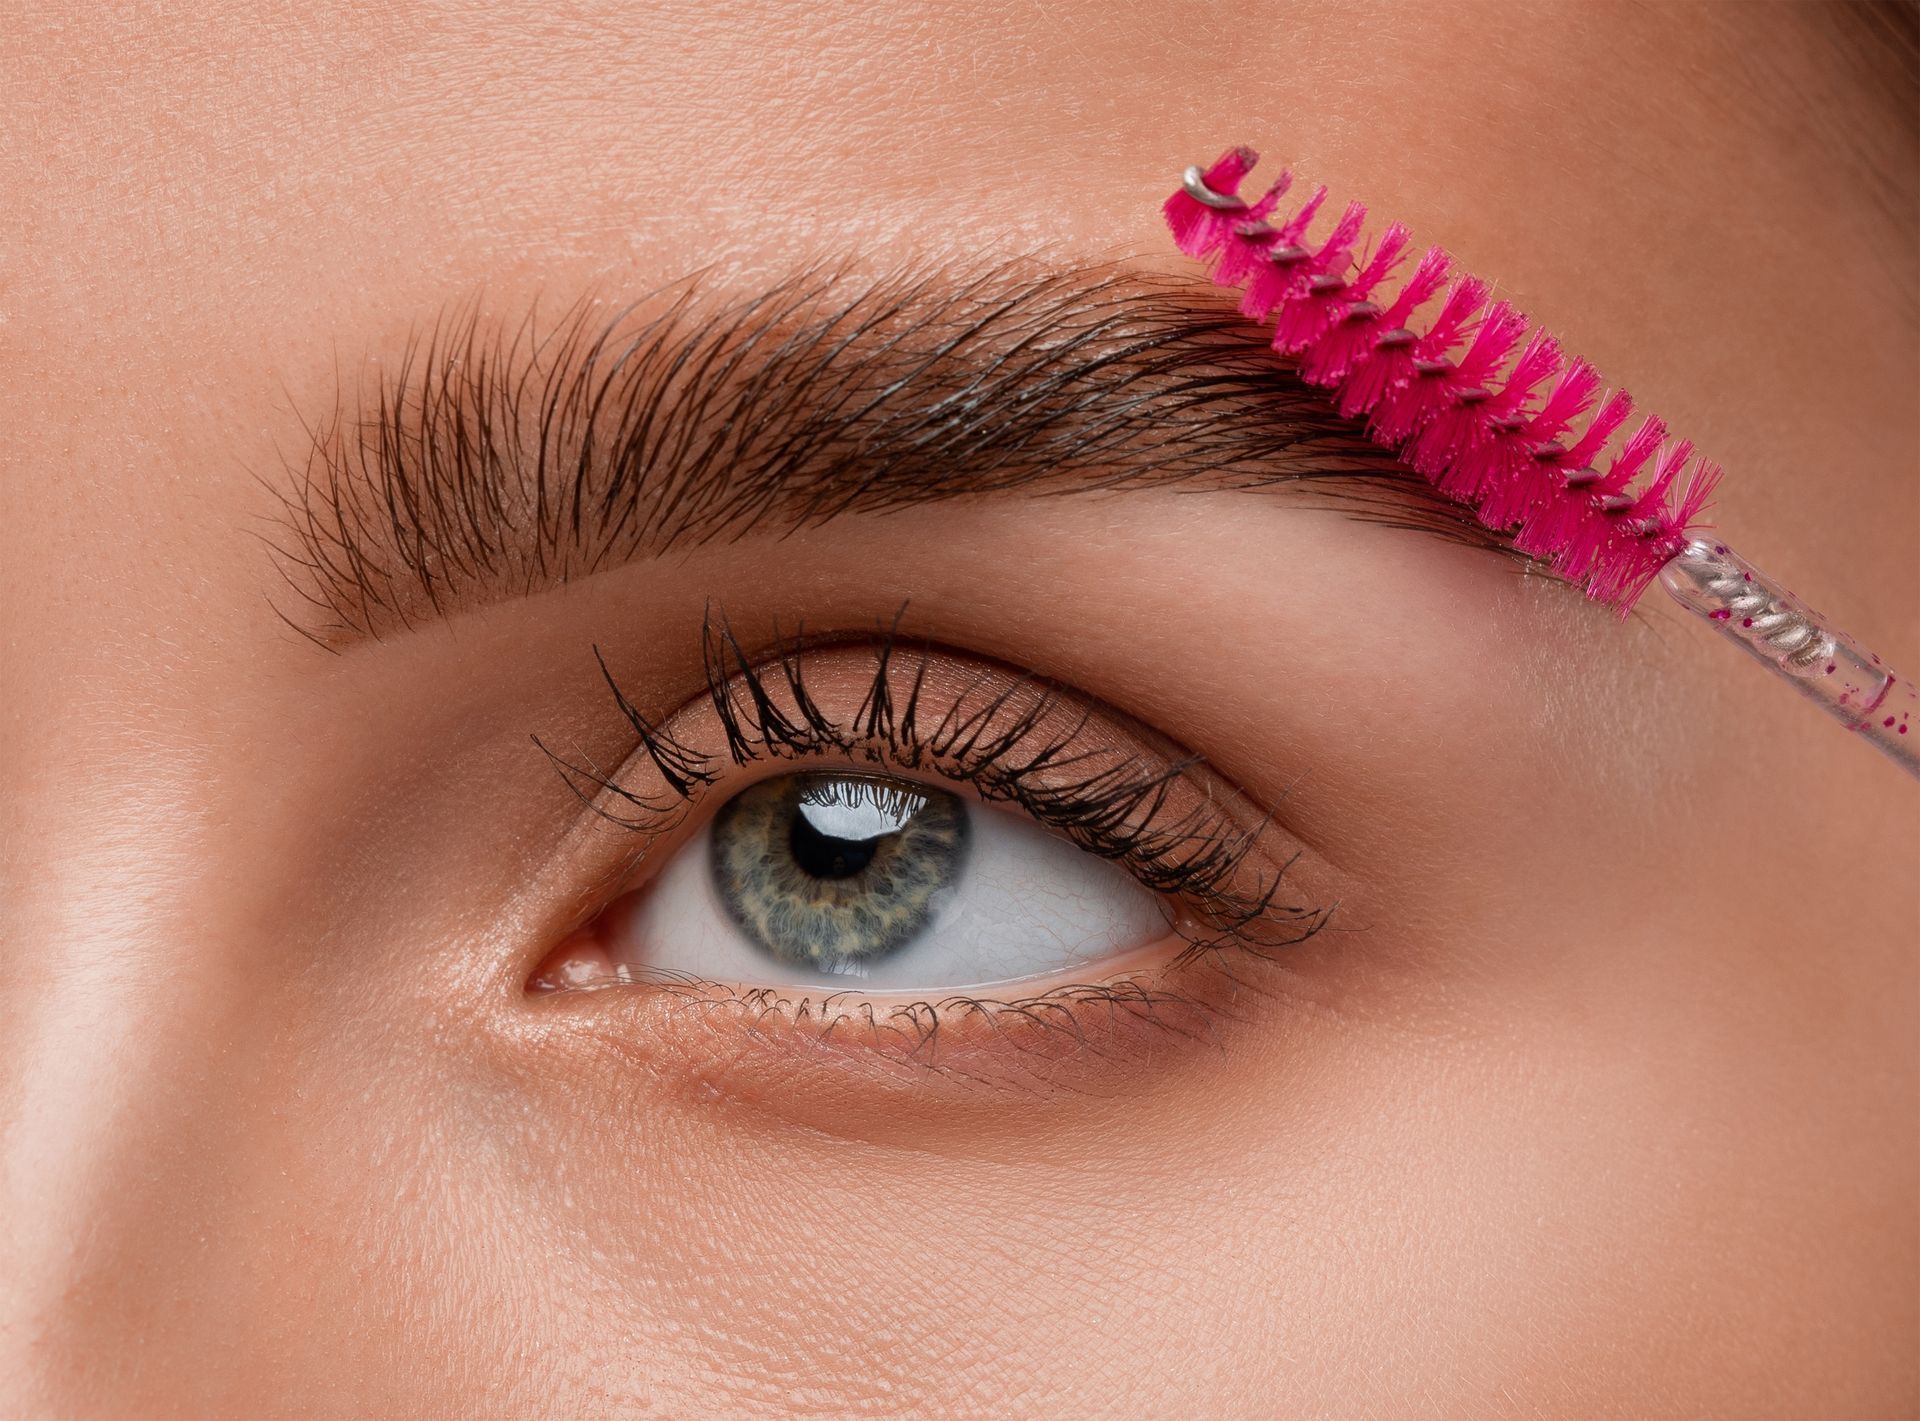 A woman is applying mascara to her eyebrows with a pink brush.